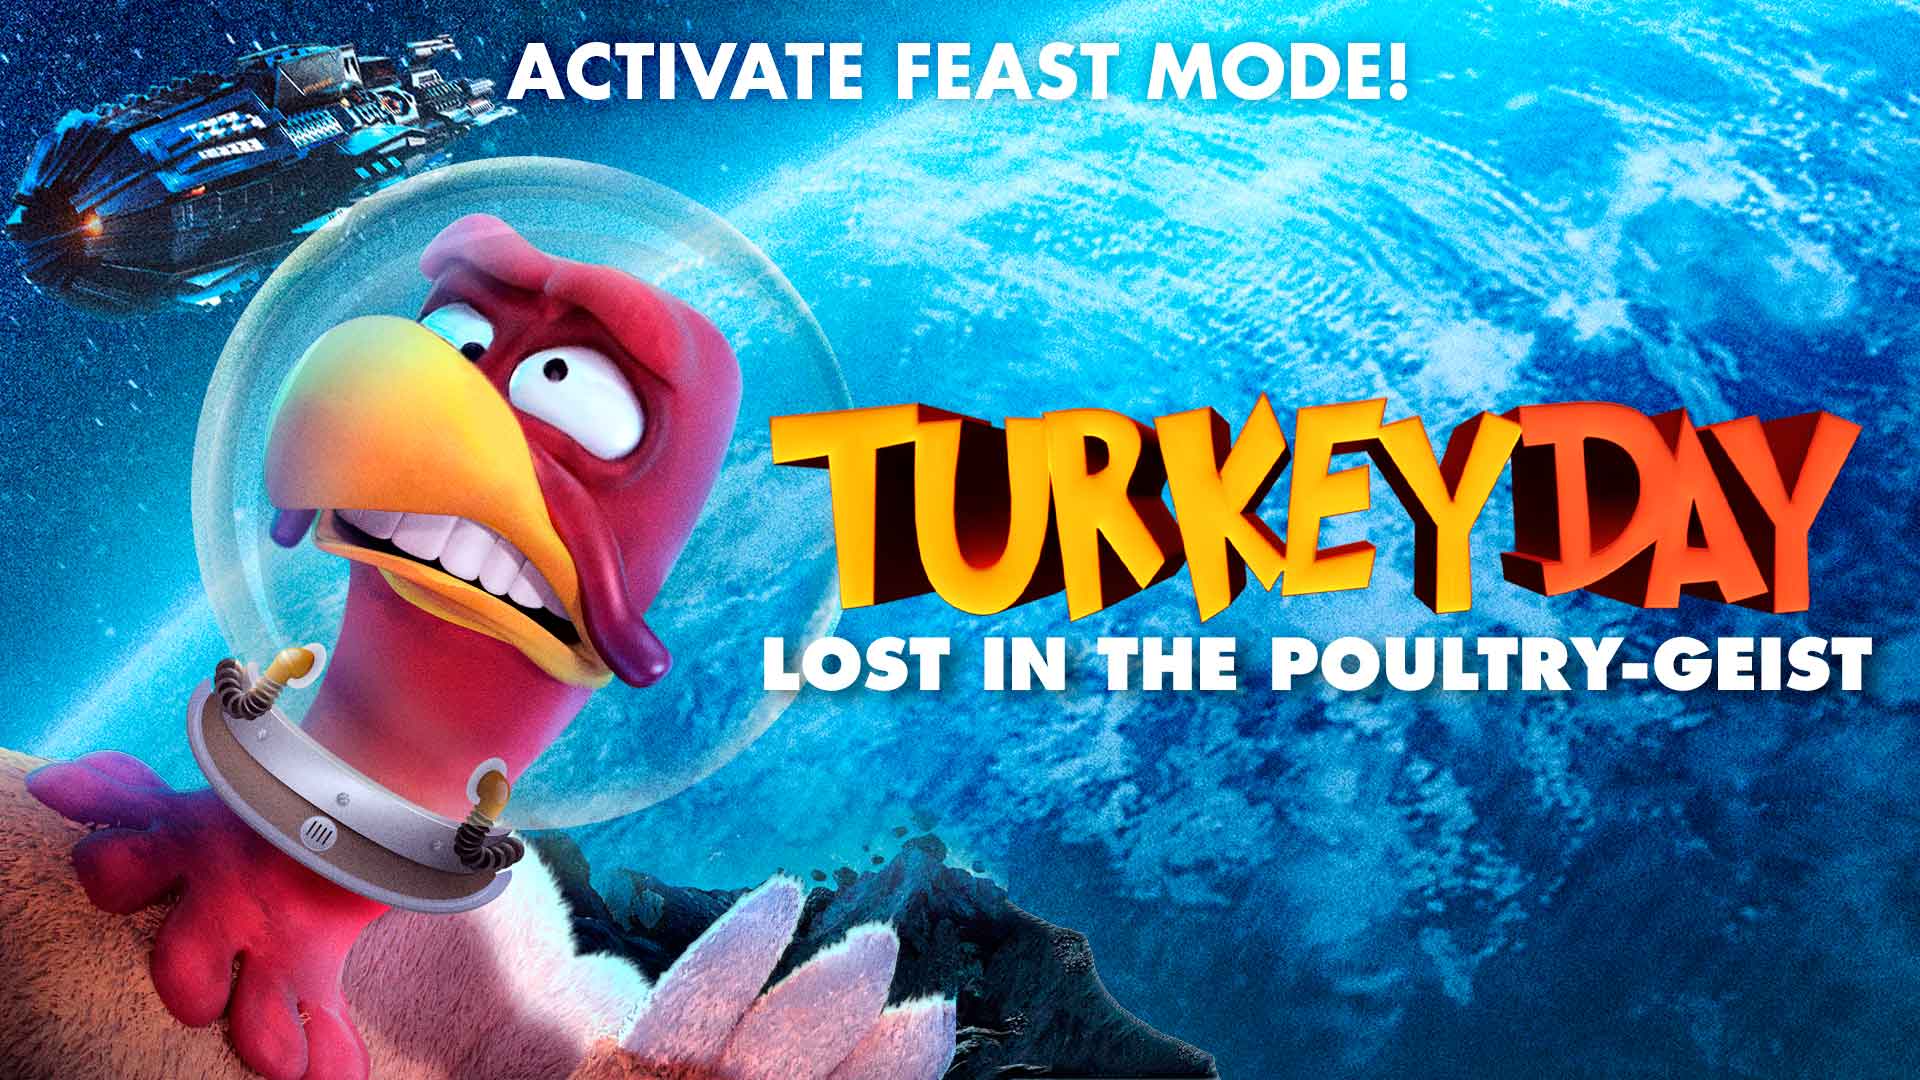 Turkey Day: Lost In The Poultry-Geist